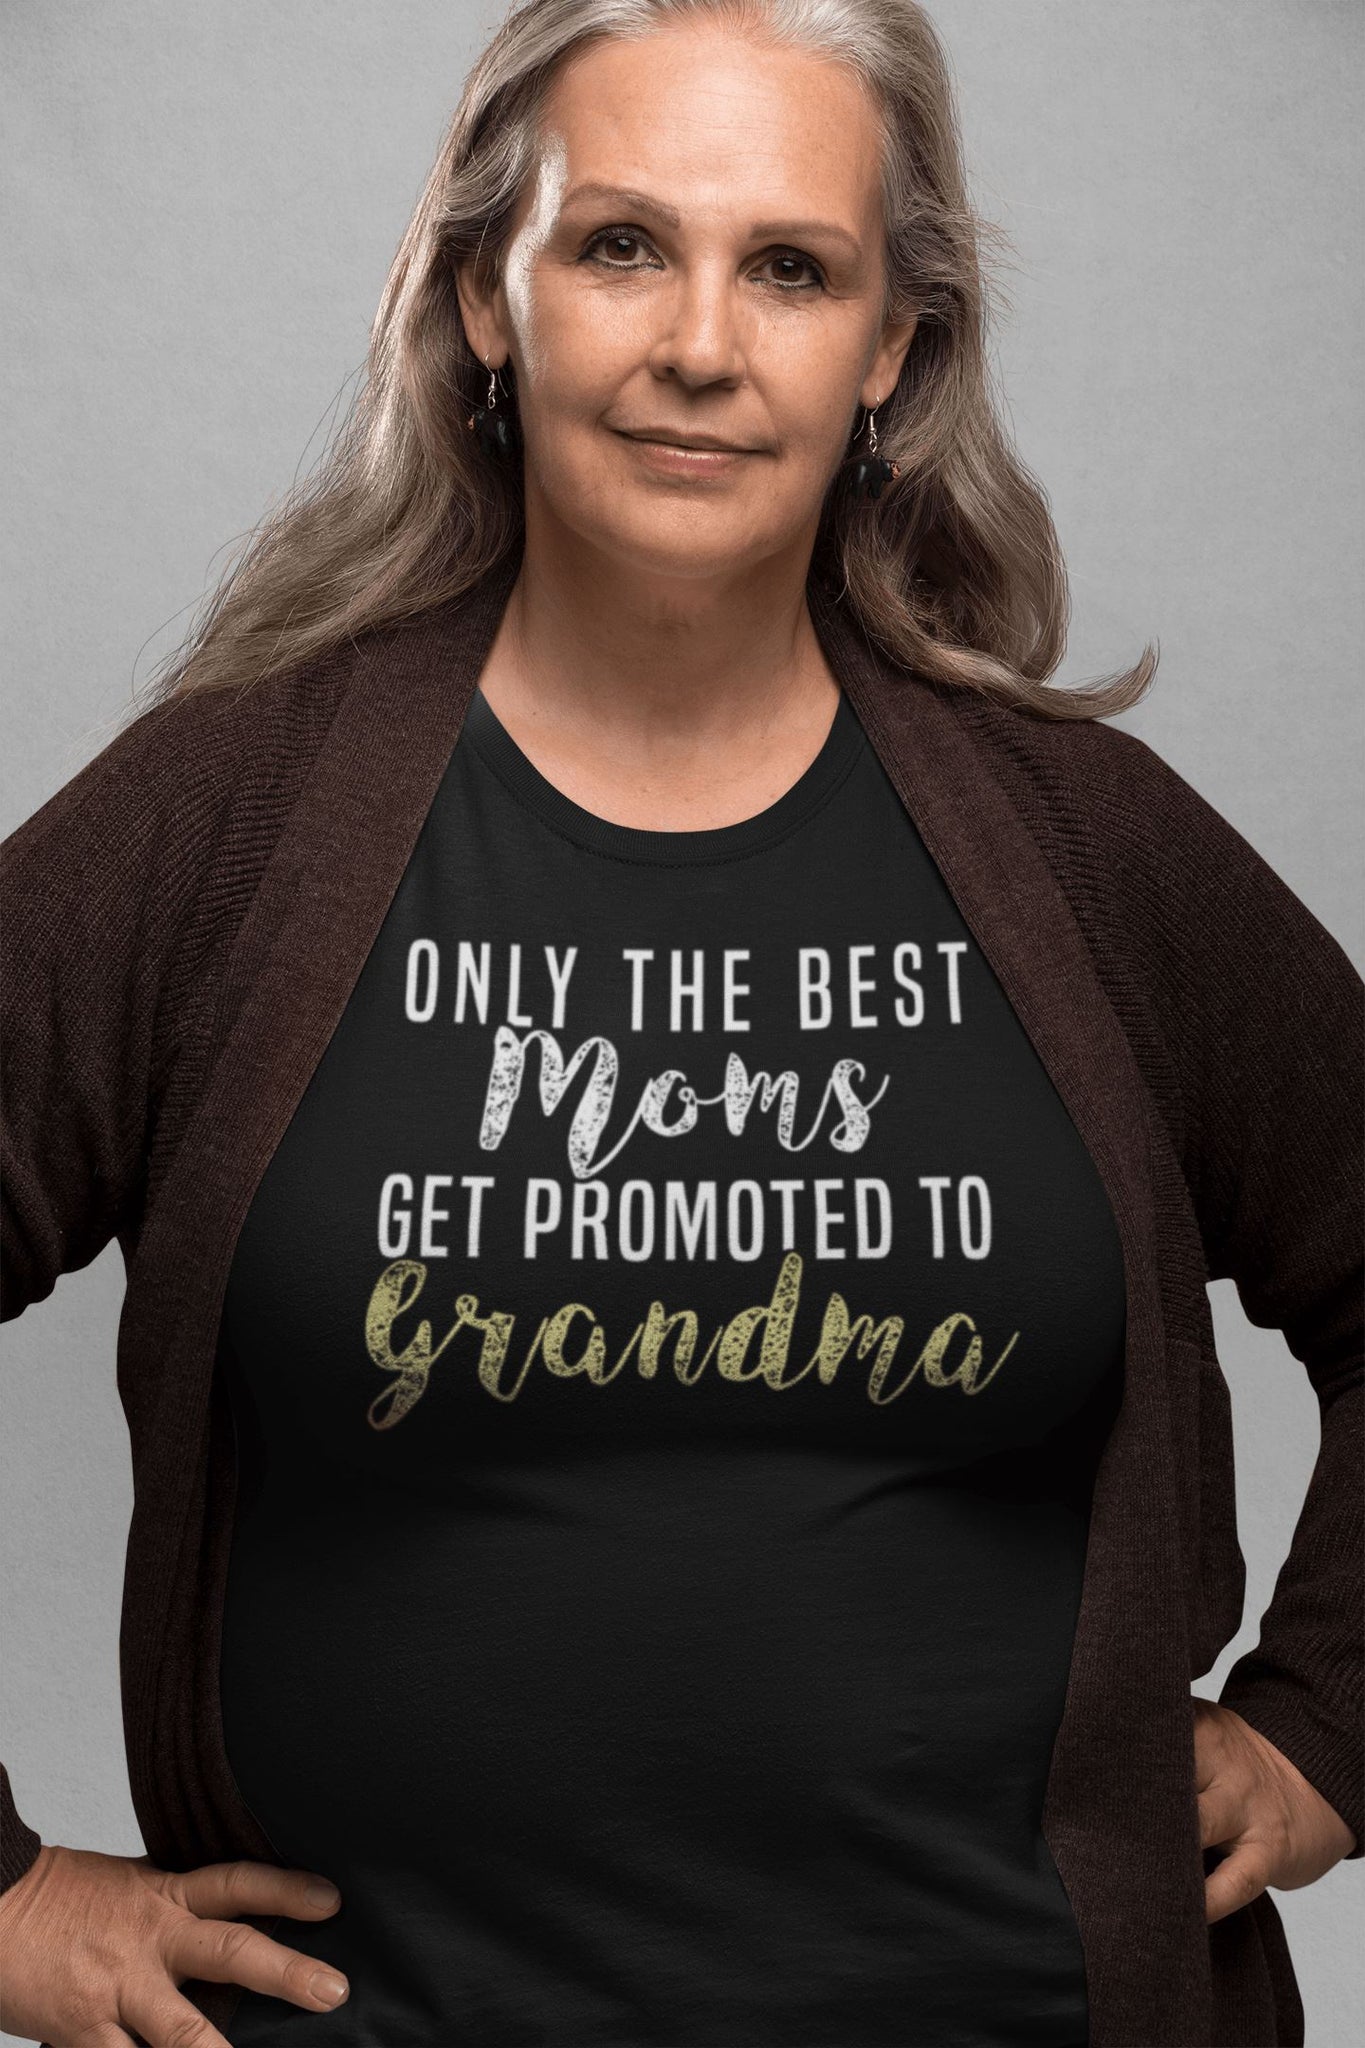 Only the Best Moms Get Promoted to Grandma Special T Shirt for Women - Catch My Drift India  black, clothing, female, grandma, grandparents, made in india, mom, mother, parents, shirt, t shir